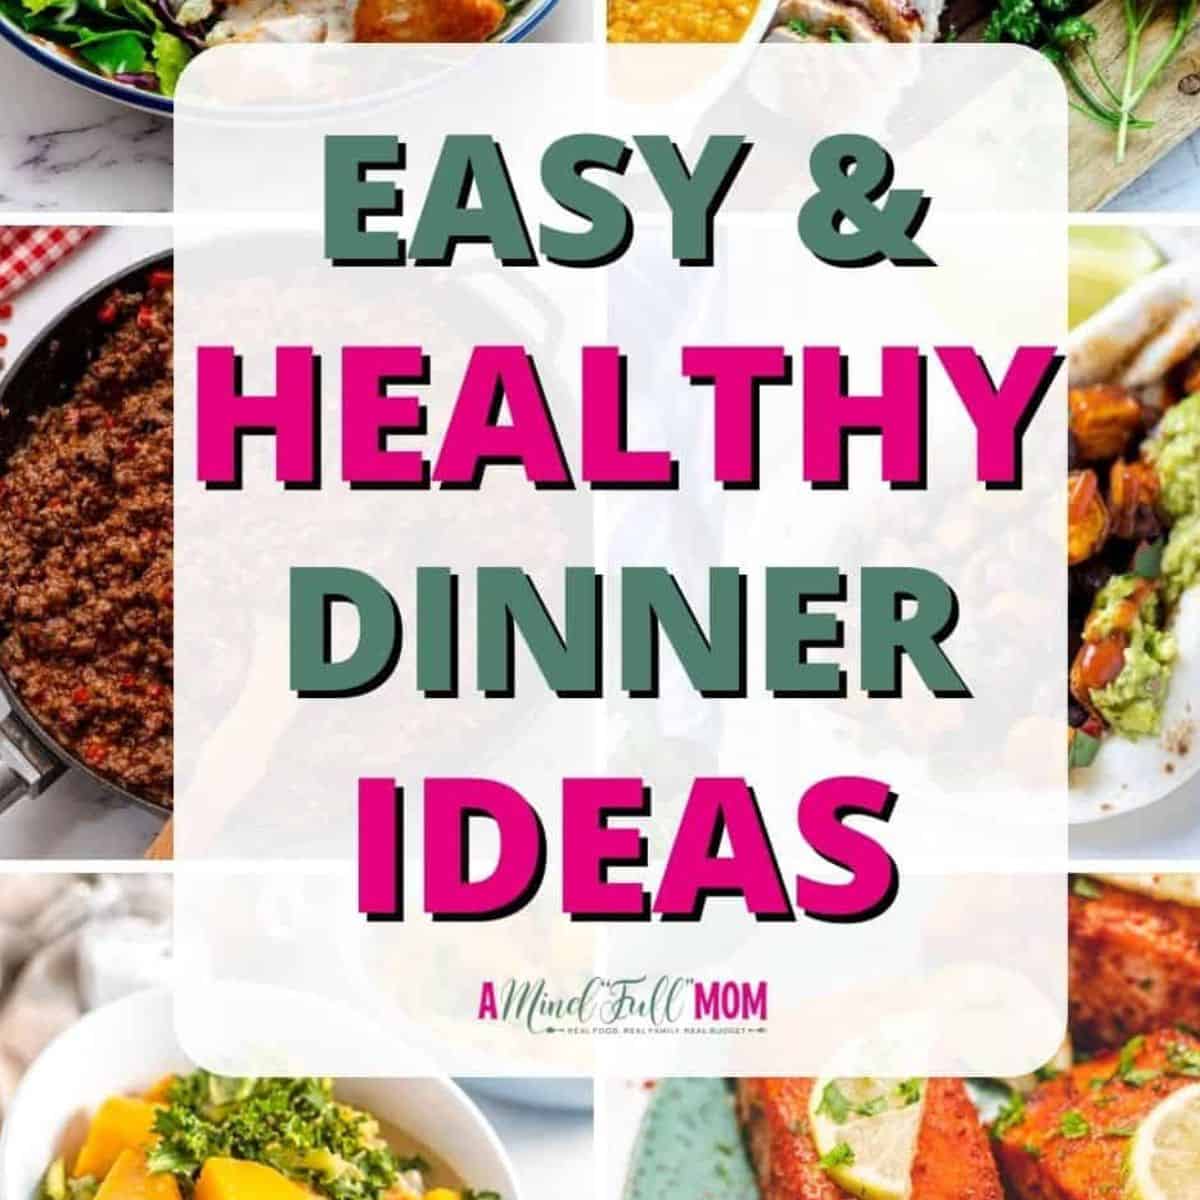 Cooking Made Easy: 53 Products That Speed Up Dinner Prep